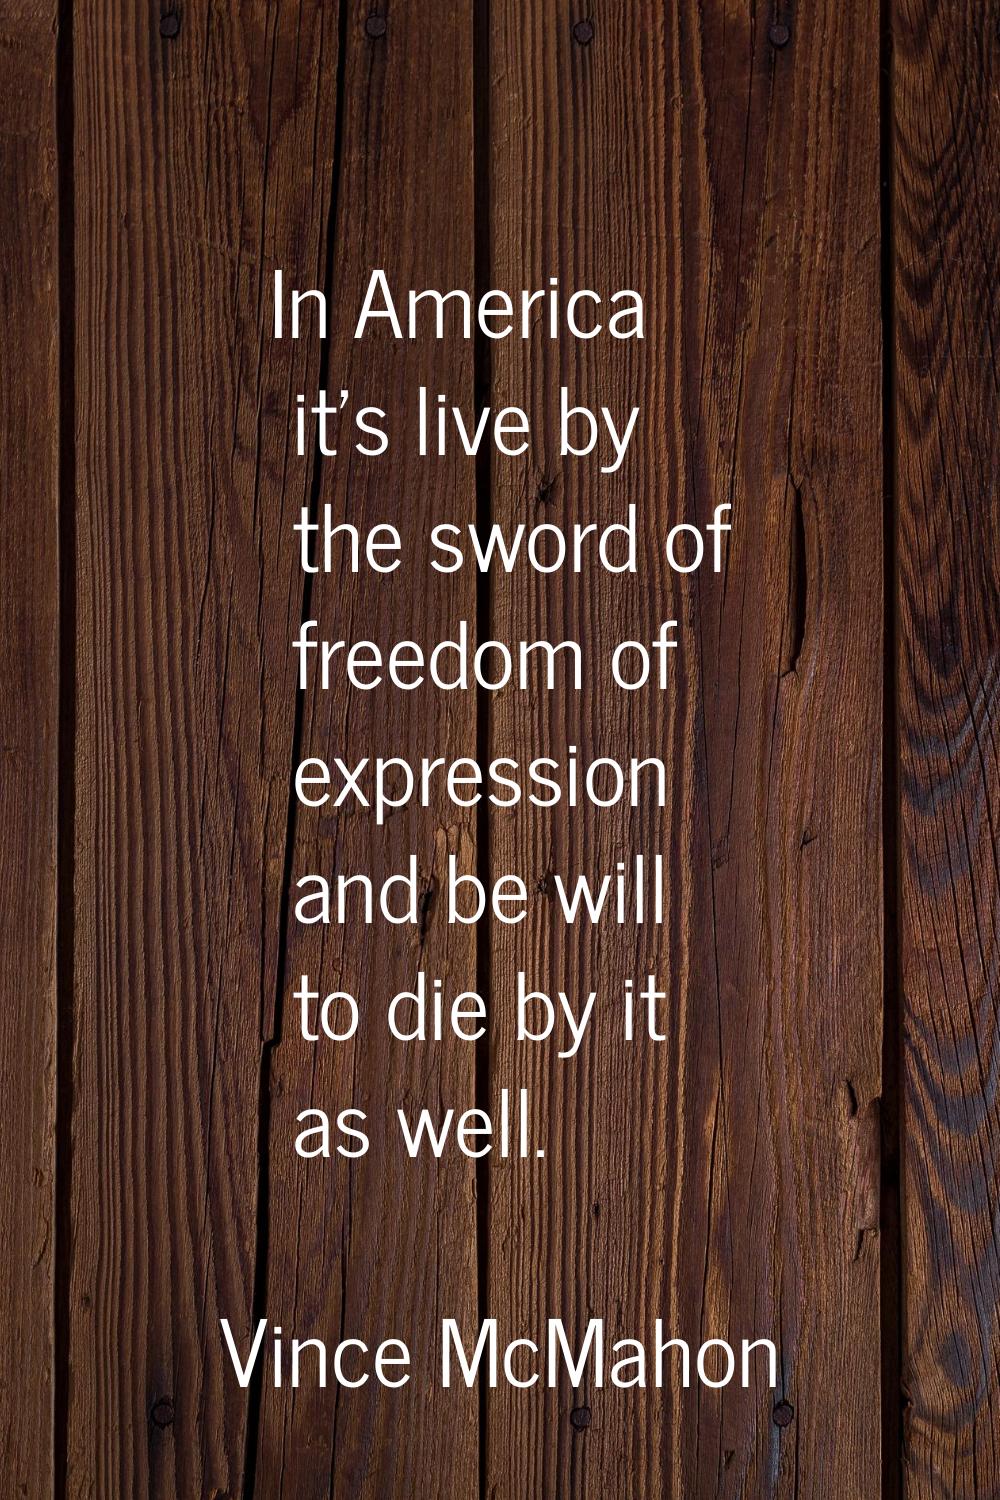 In America it's live by the sword of freedom of expression and be will to die by it as well.